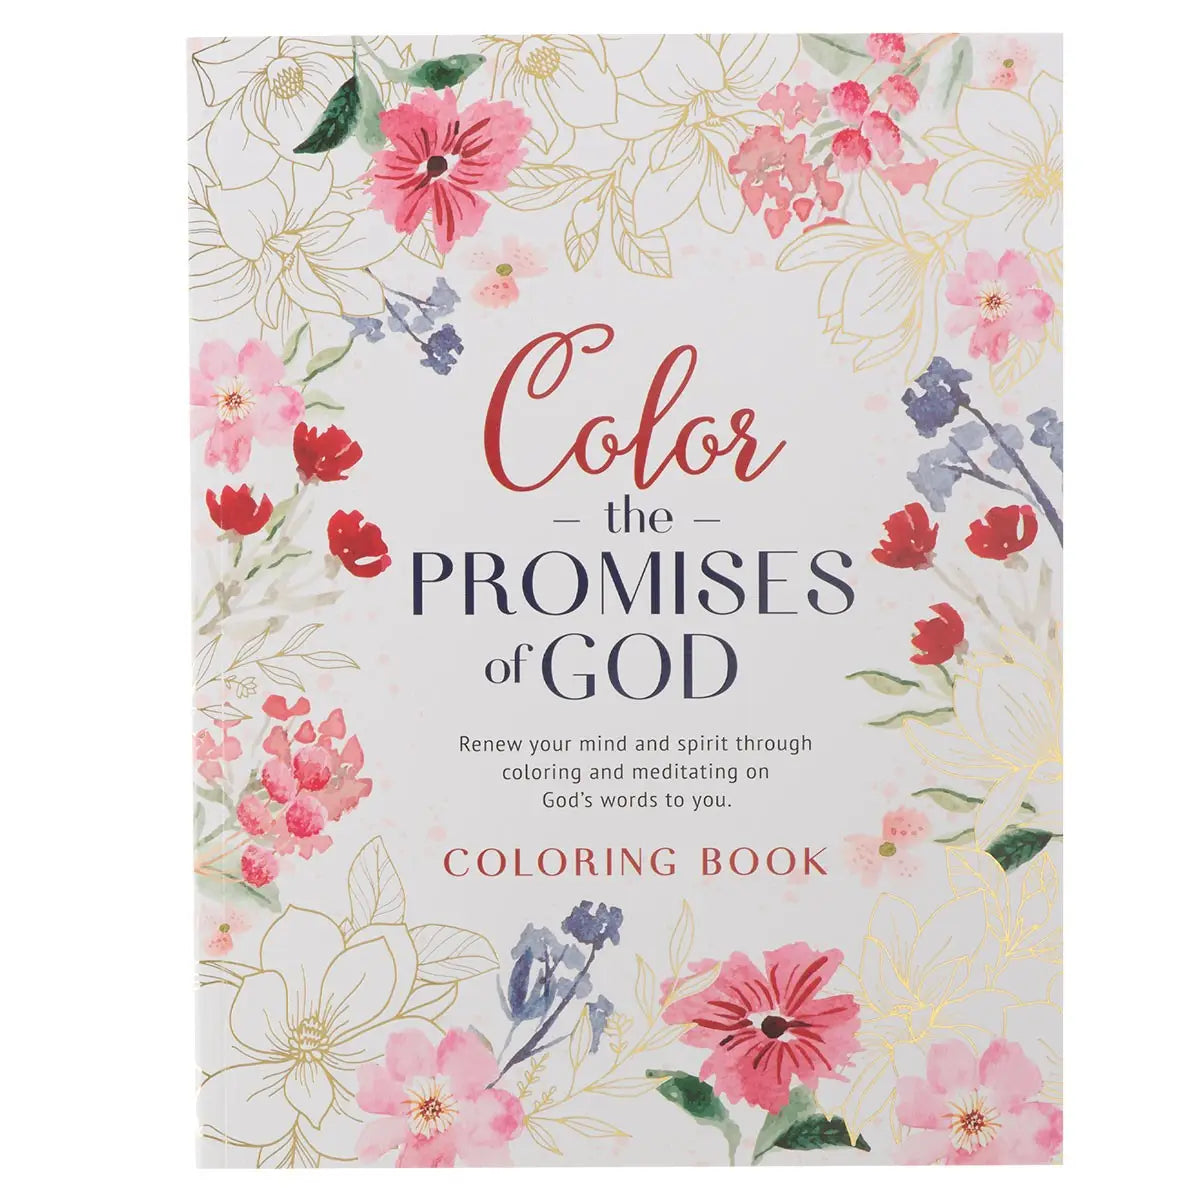 The Promises of God Coloring Book